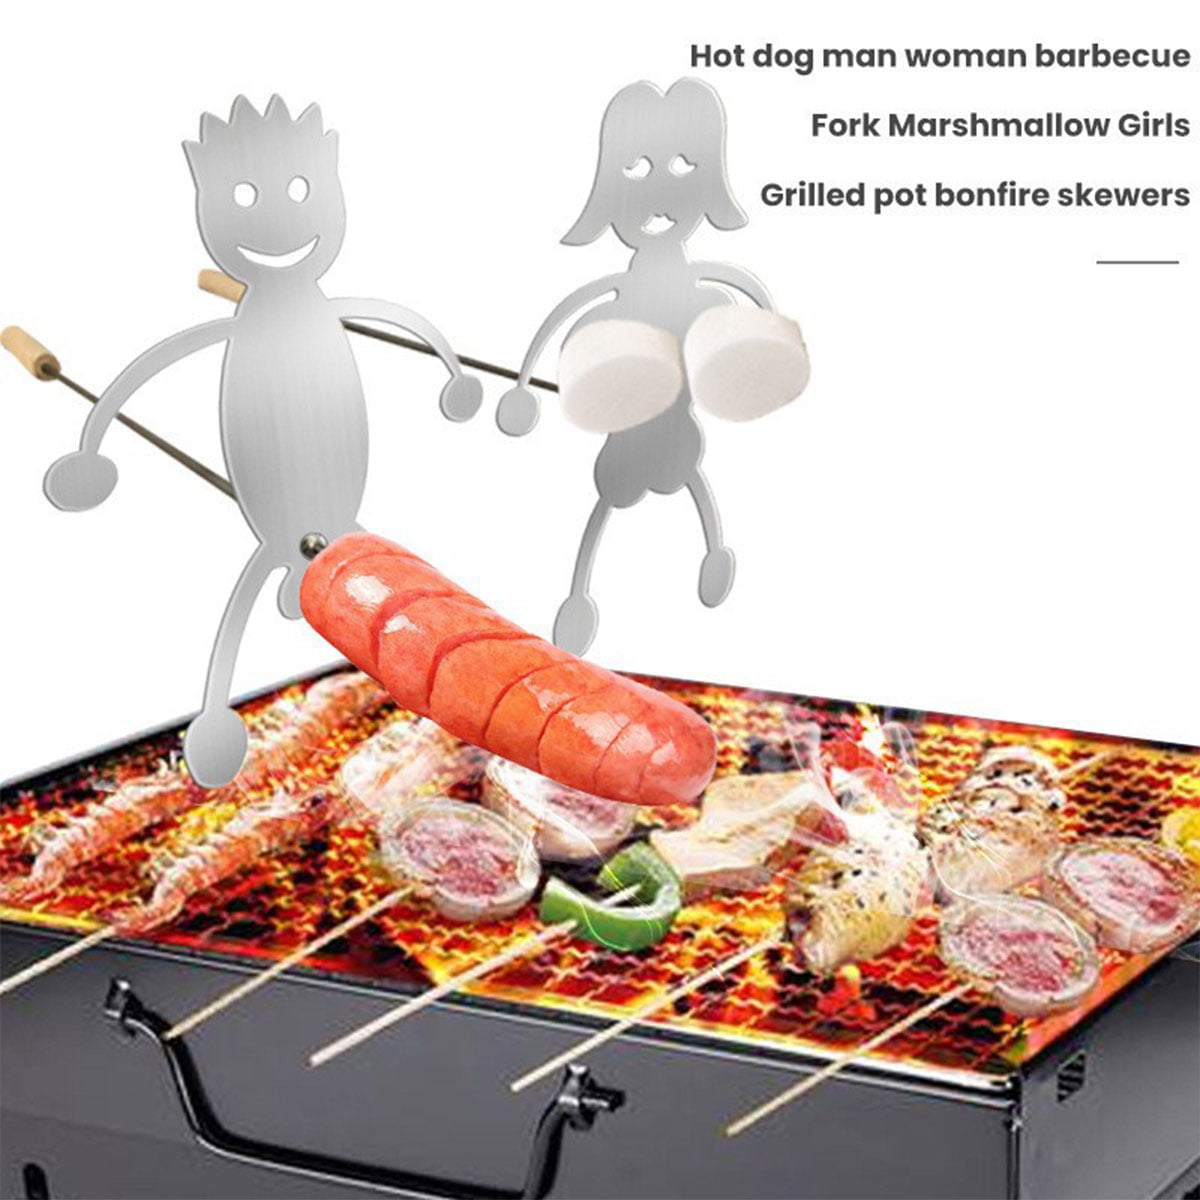 Boy & Gril Stainless Steel Hot Dog/Marshmallow Roasters,BBQ Barbecue Skewer Novelty Women Men Shaped Camp Fire Roasting Stick,Funny Metal Craft Forks for Campfire,Bonfire and Grill 